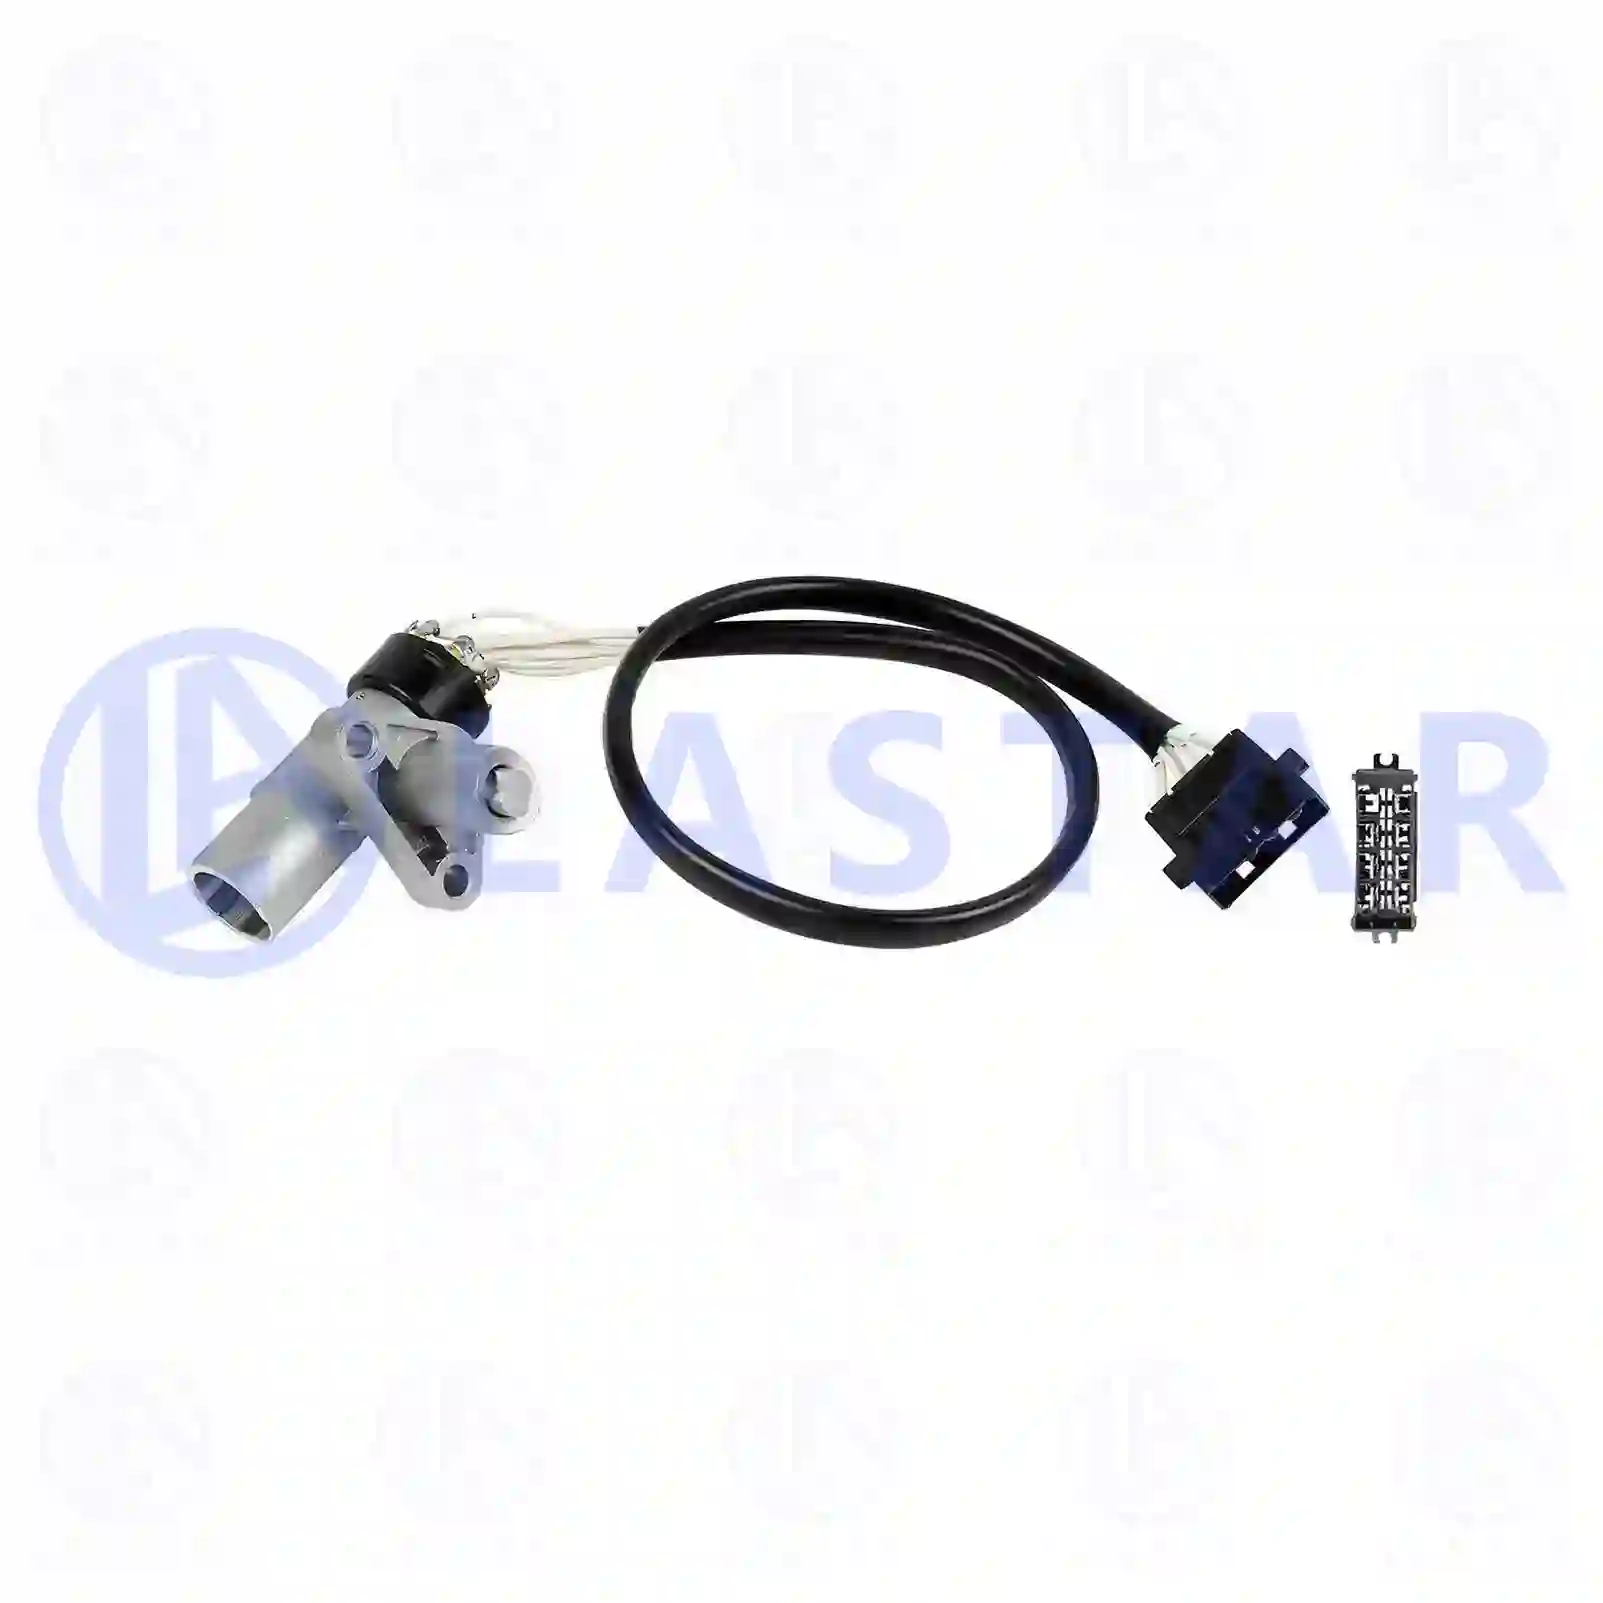  Steering lock || Lastar Spare Part | Truck Spare Parts, Auotomotive Spare Parts